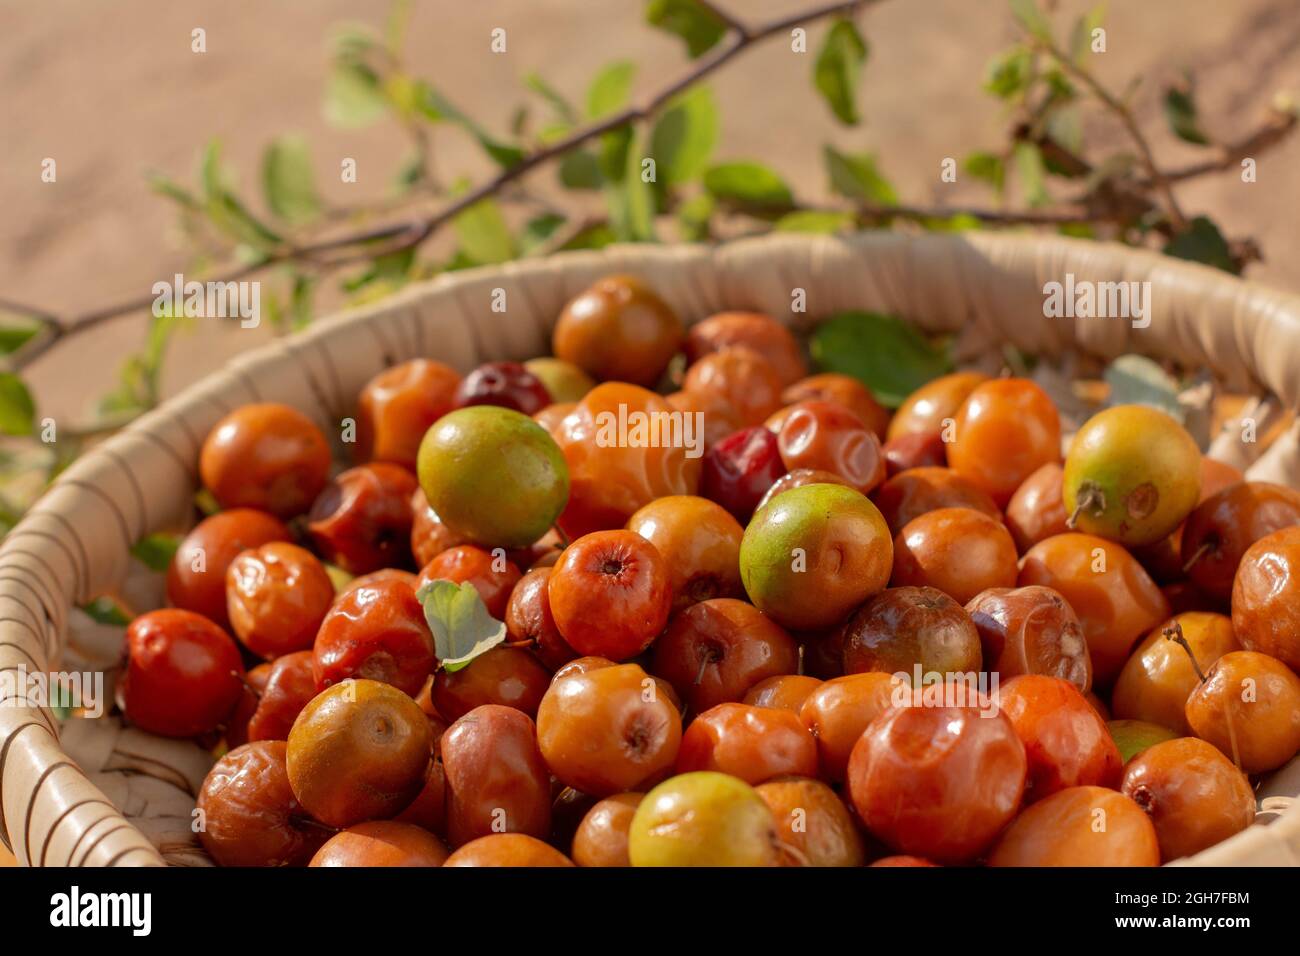 Ziziphus jujuba, commonly called jujube, also known as Chinese date, Chinese apple, Indian plum, Indian jujube, Musawu or Maçanica Stock Photo